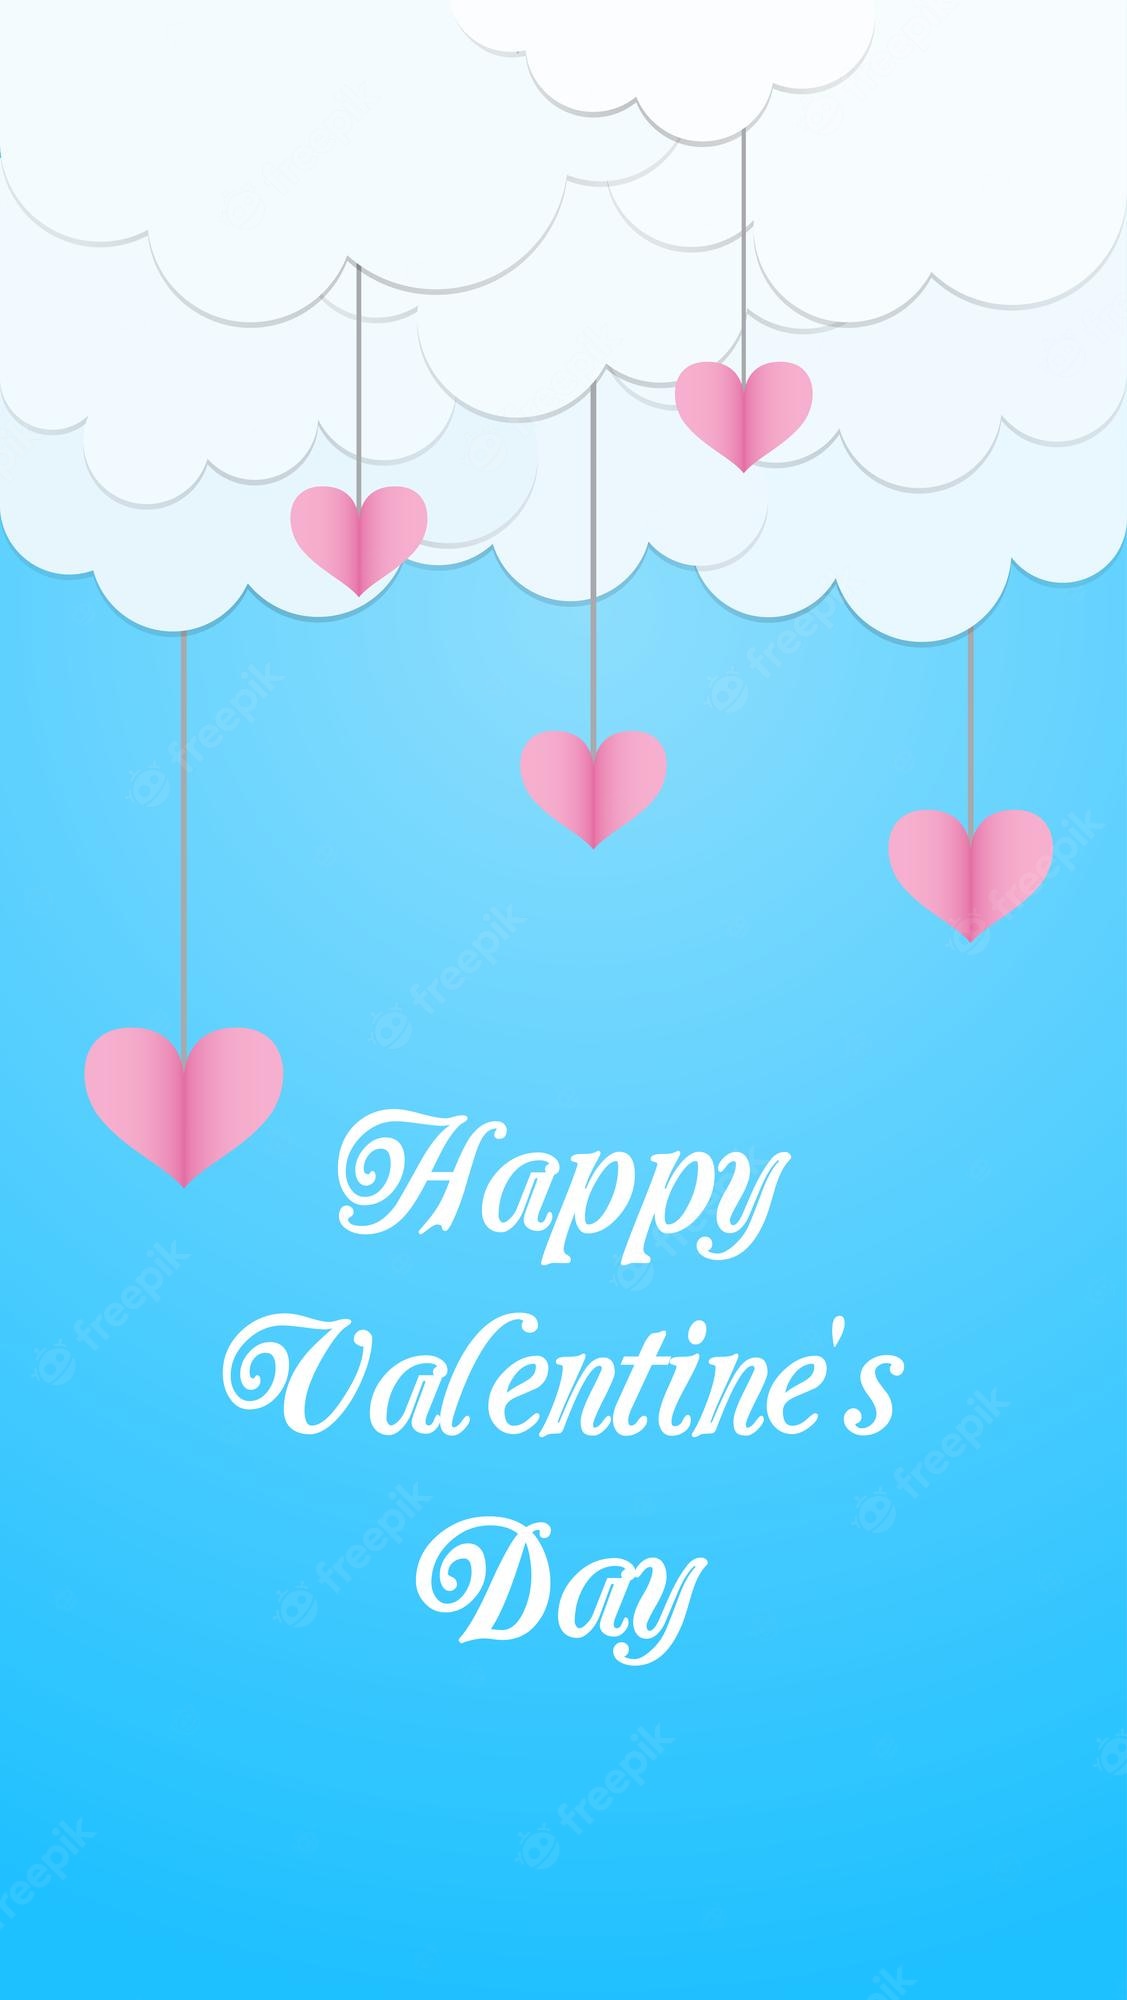 Premium Vector. Design for a banner postcard smartphone wallpaper for valentine's day blue sky with clouds and paper cut hearts vector illustration